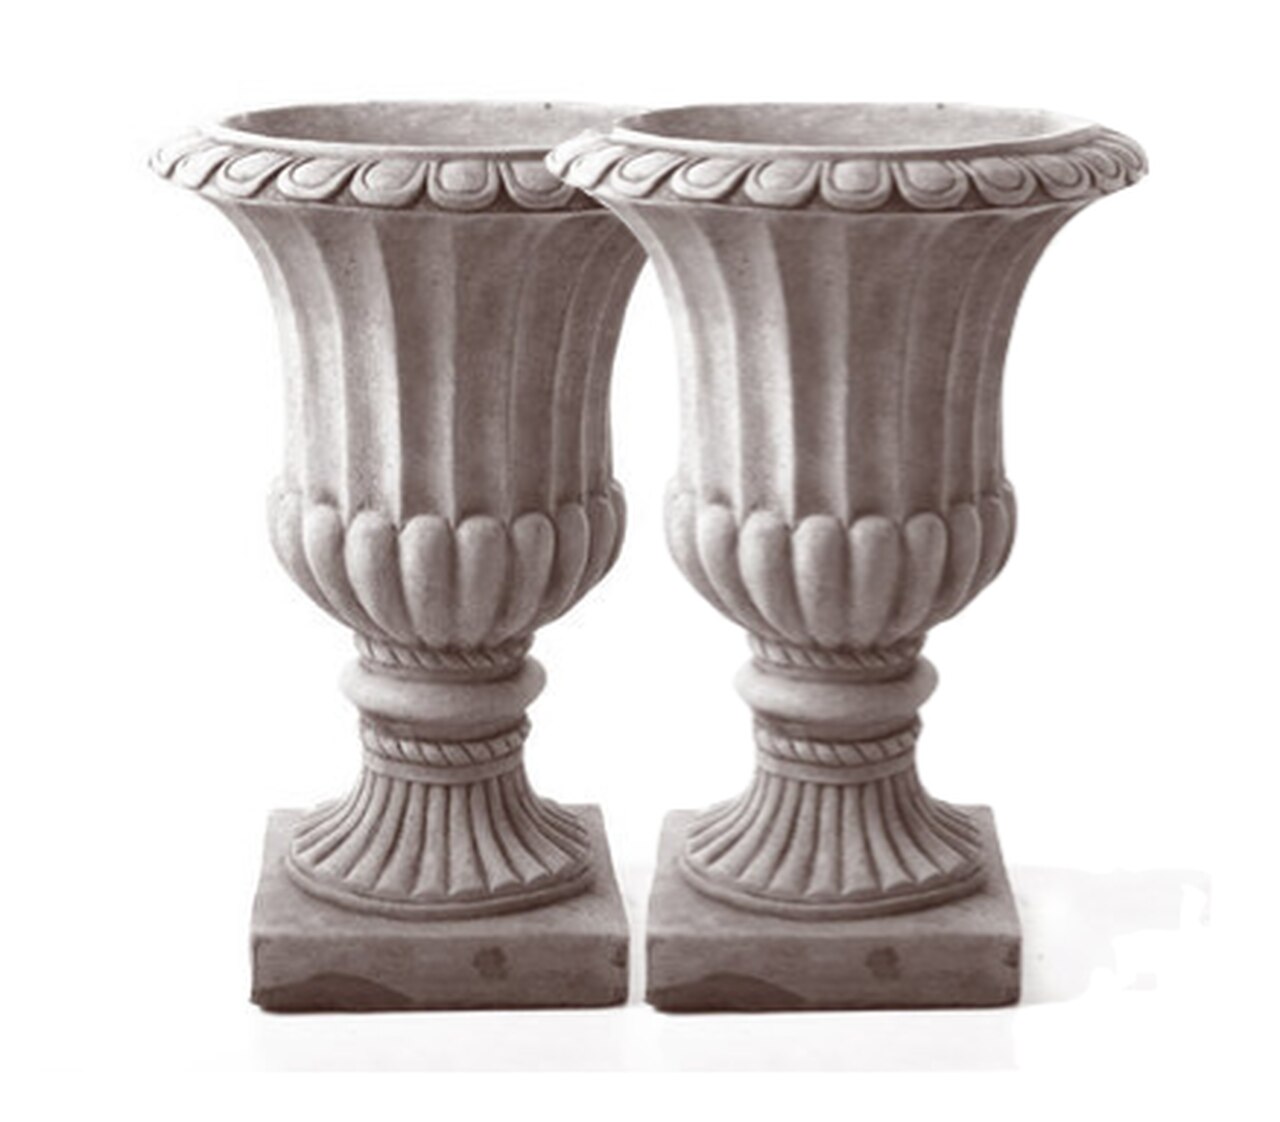 7 Items To Put In Urns For A Fabulous Look